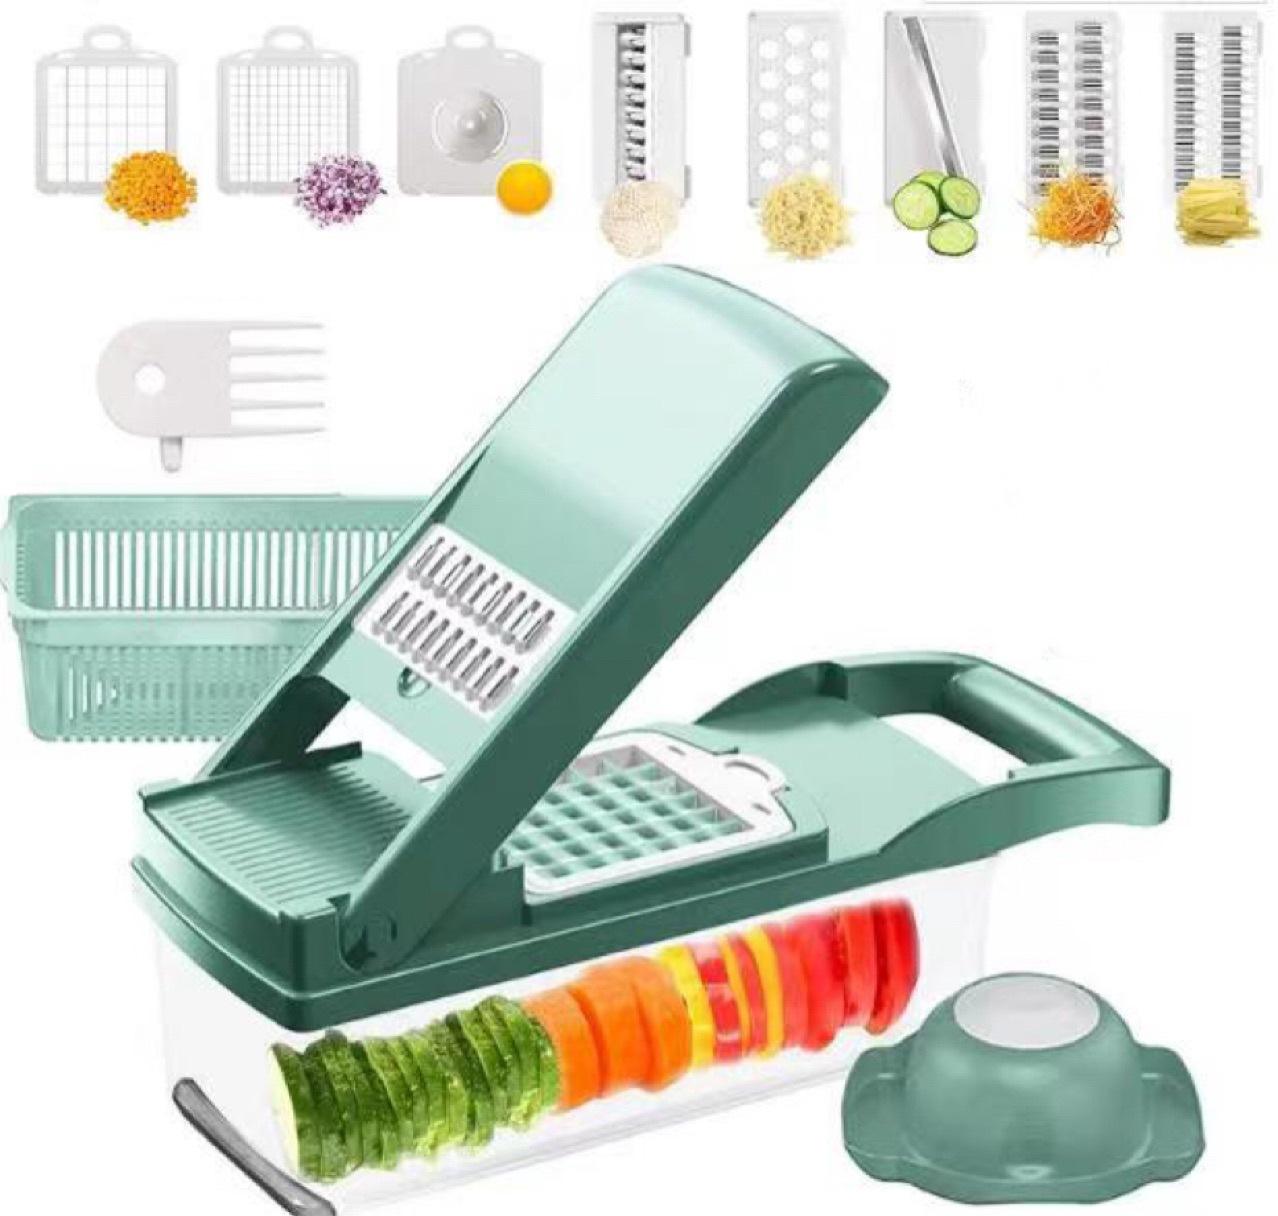 Multifunction 12-In-1 Mandoline Slicer, Vegetable Chopper, Food Chopper, Onion Cutter for Kitchen w/ Container